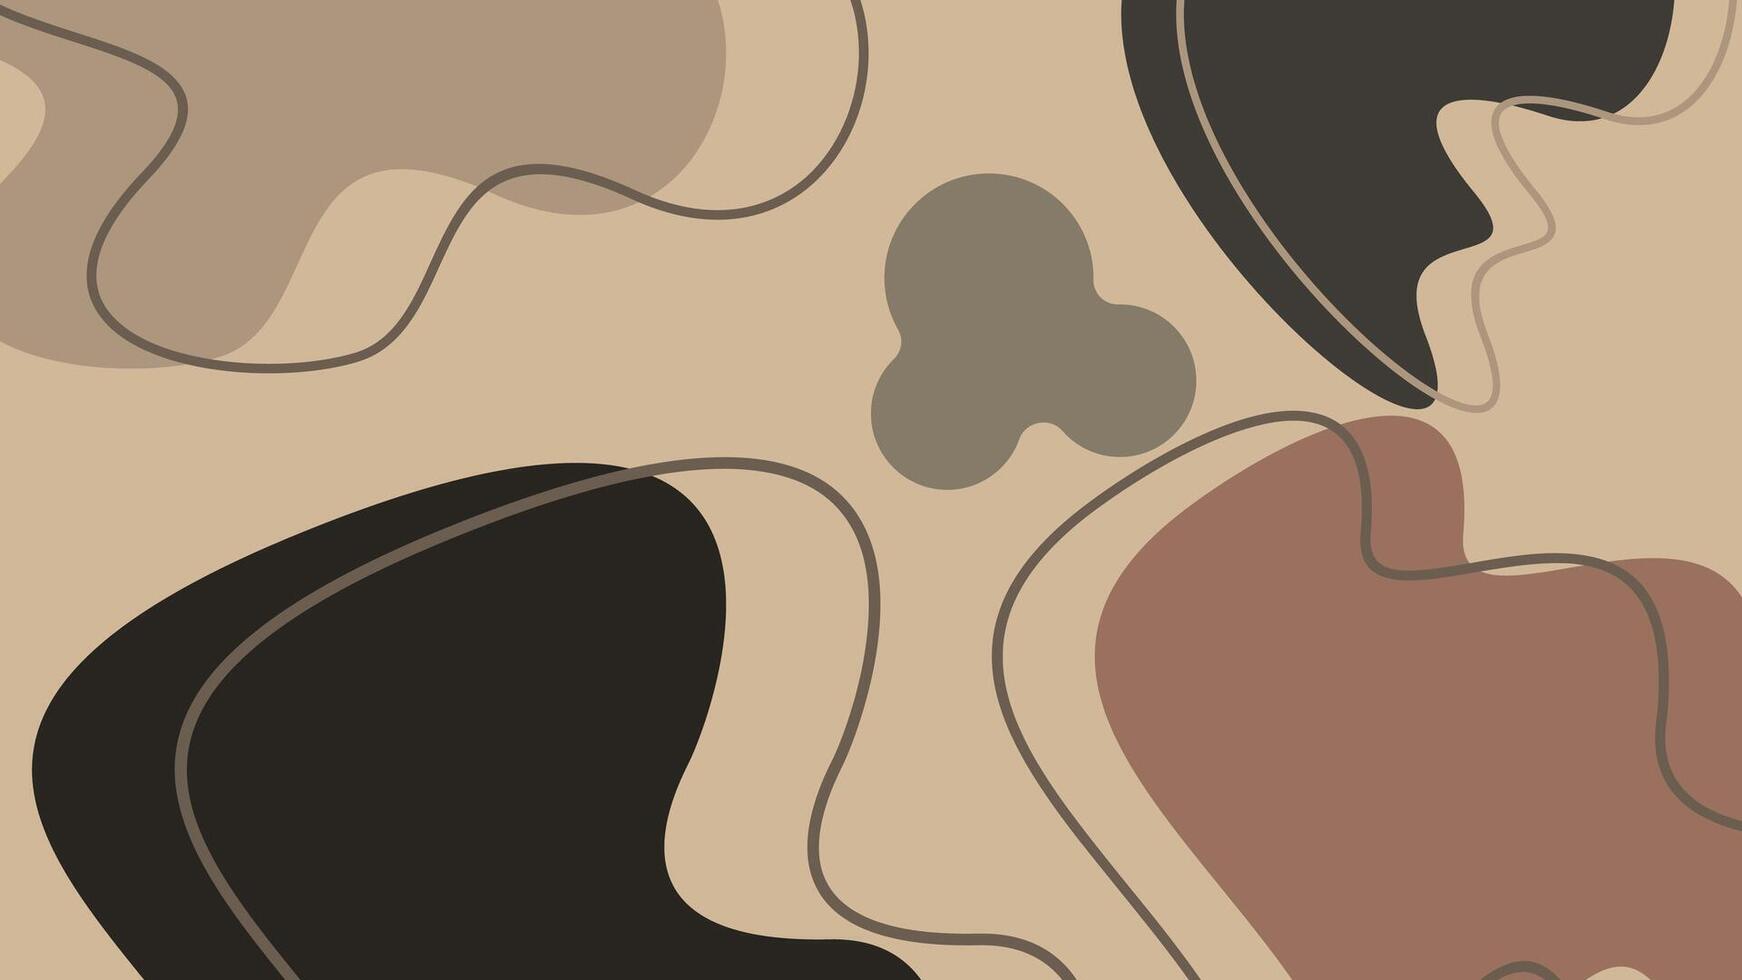 Abstract background in brown and beige colors. Vector illustration for your design.